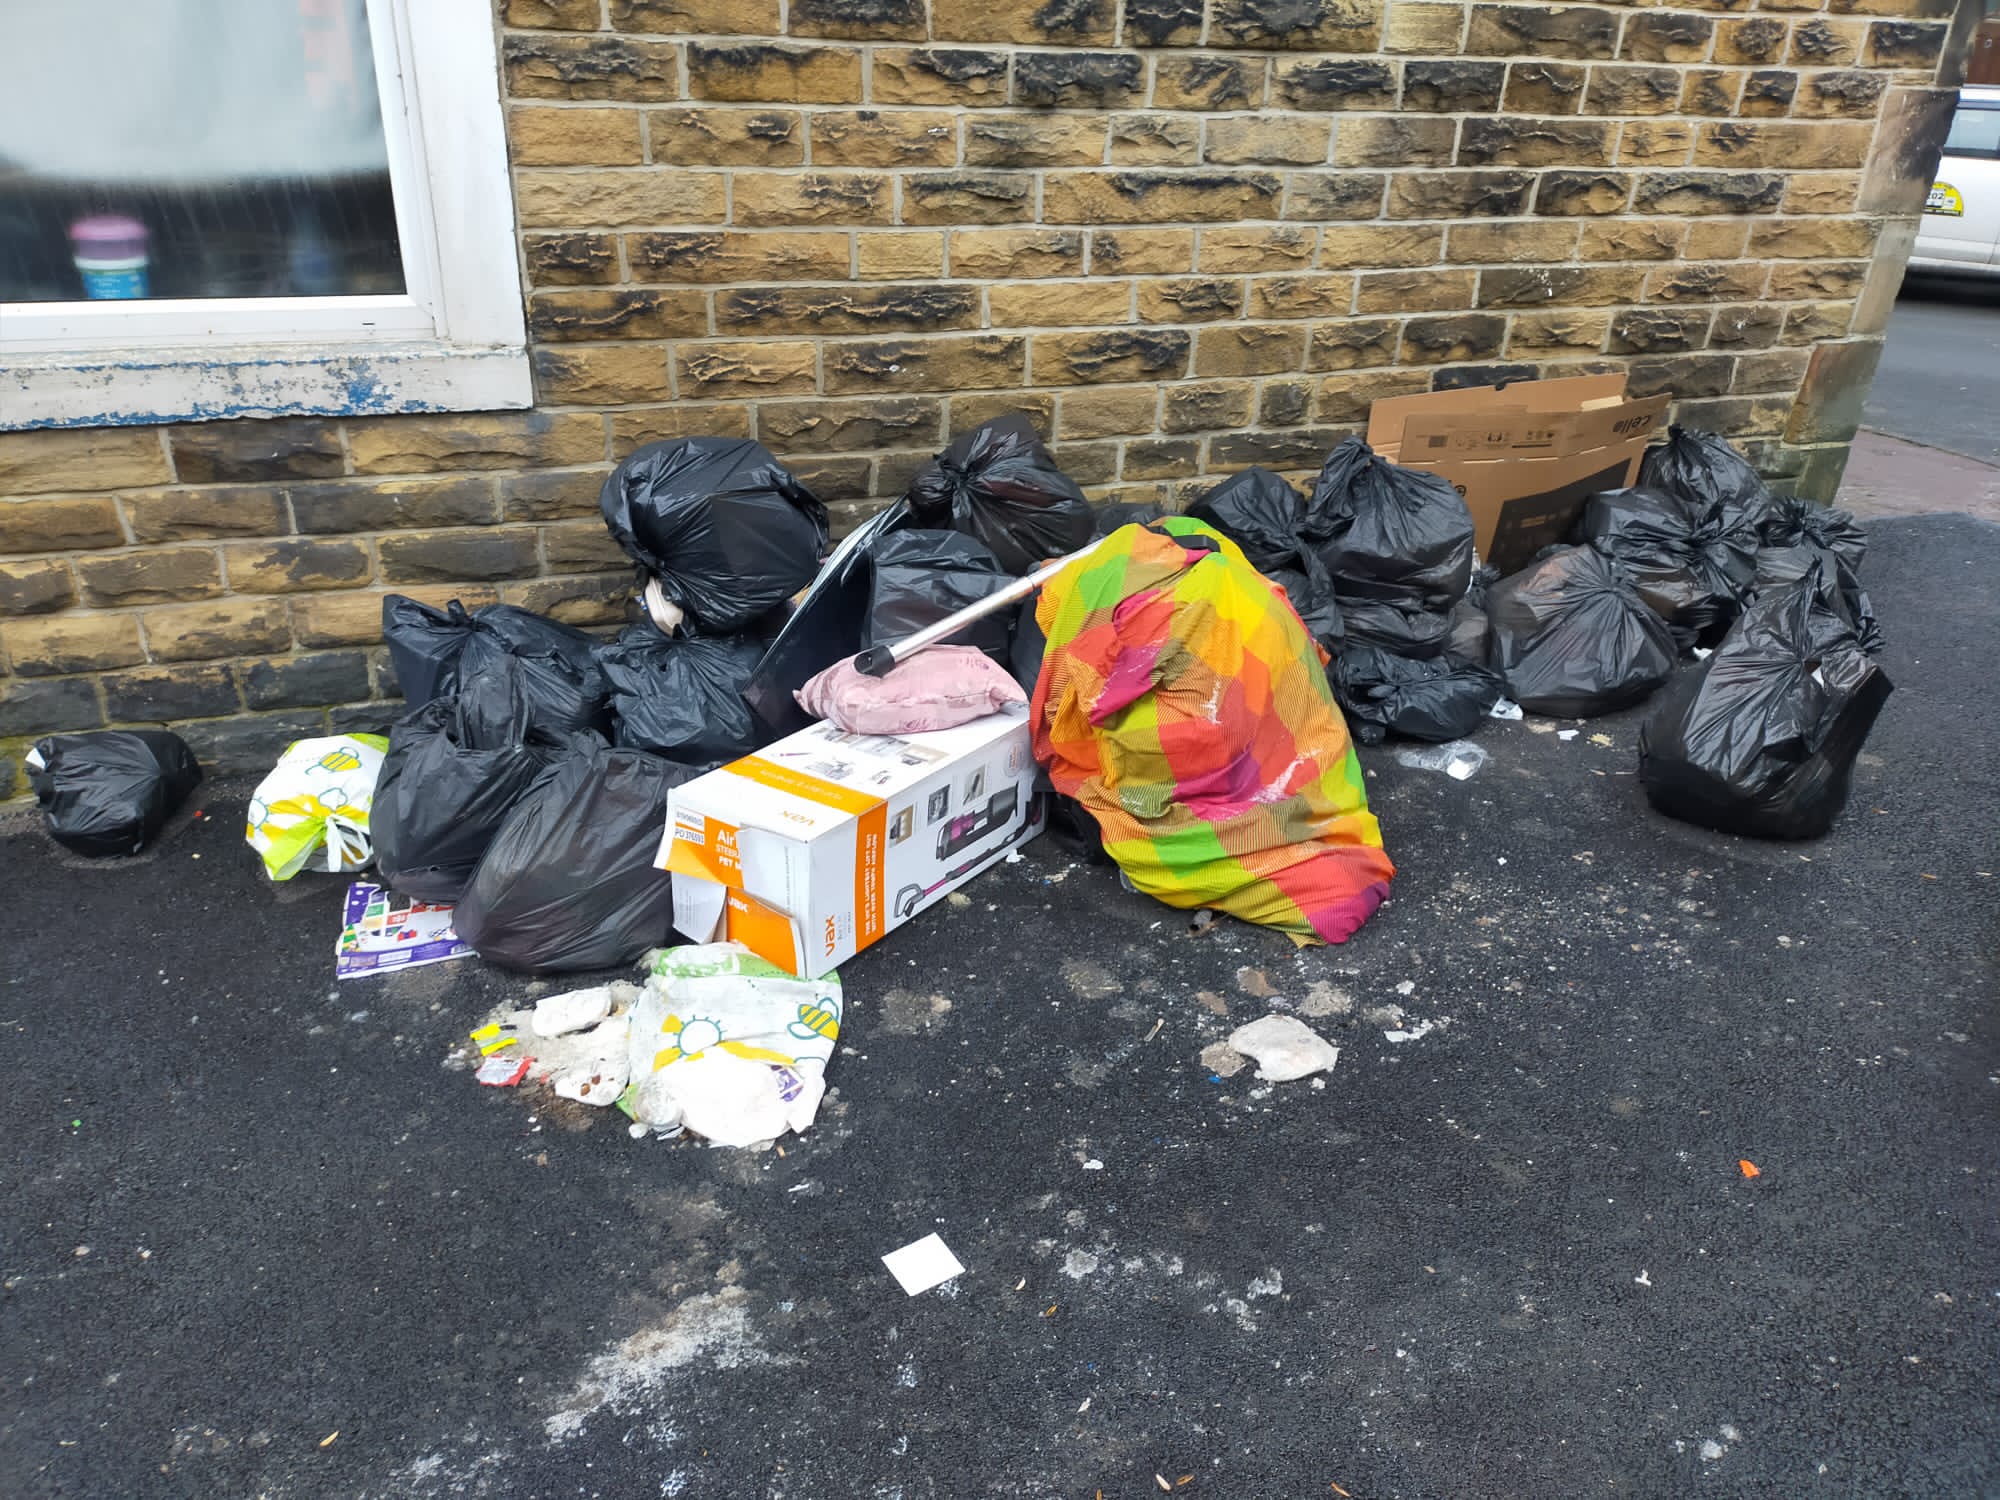 Two Nelson residents have been fined over £2,700 between them for persistently dumping waste